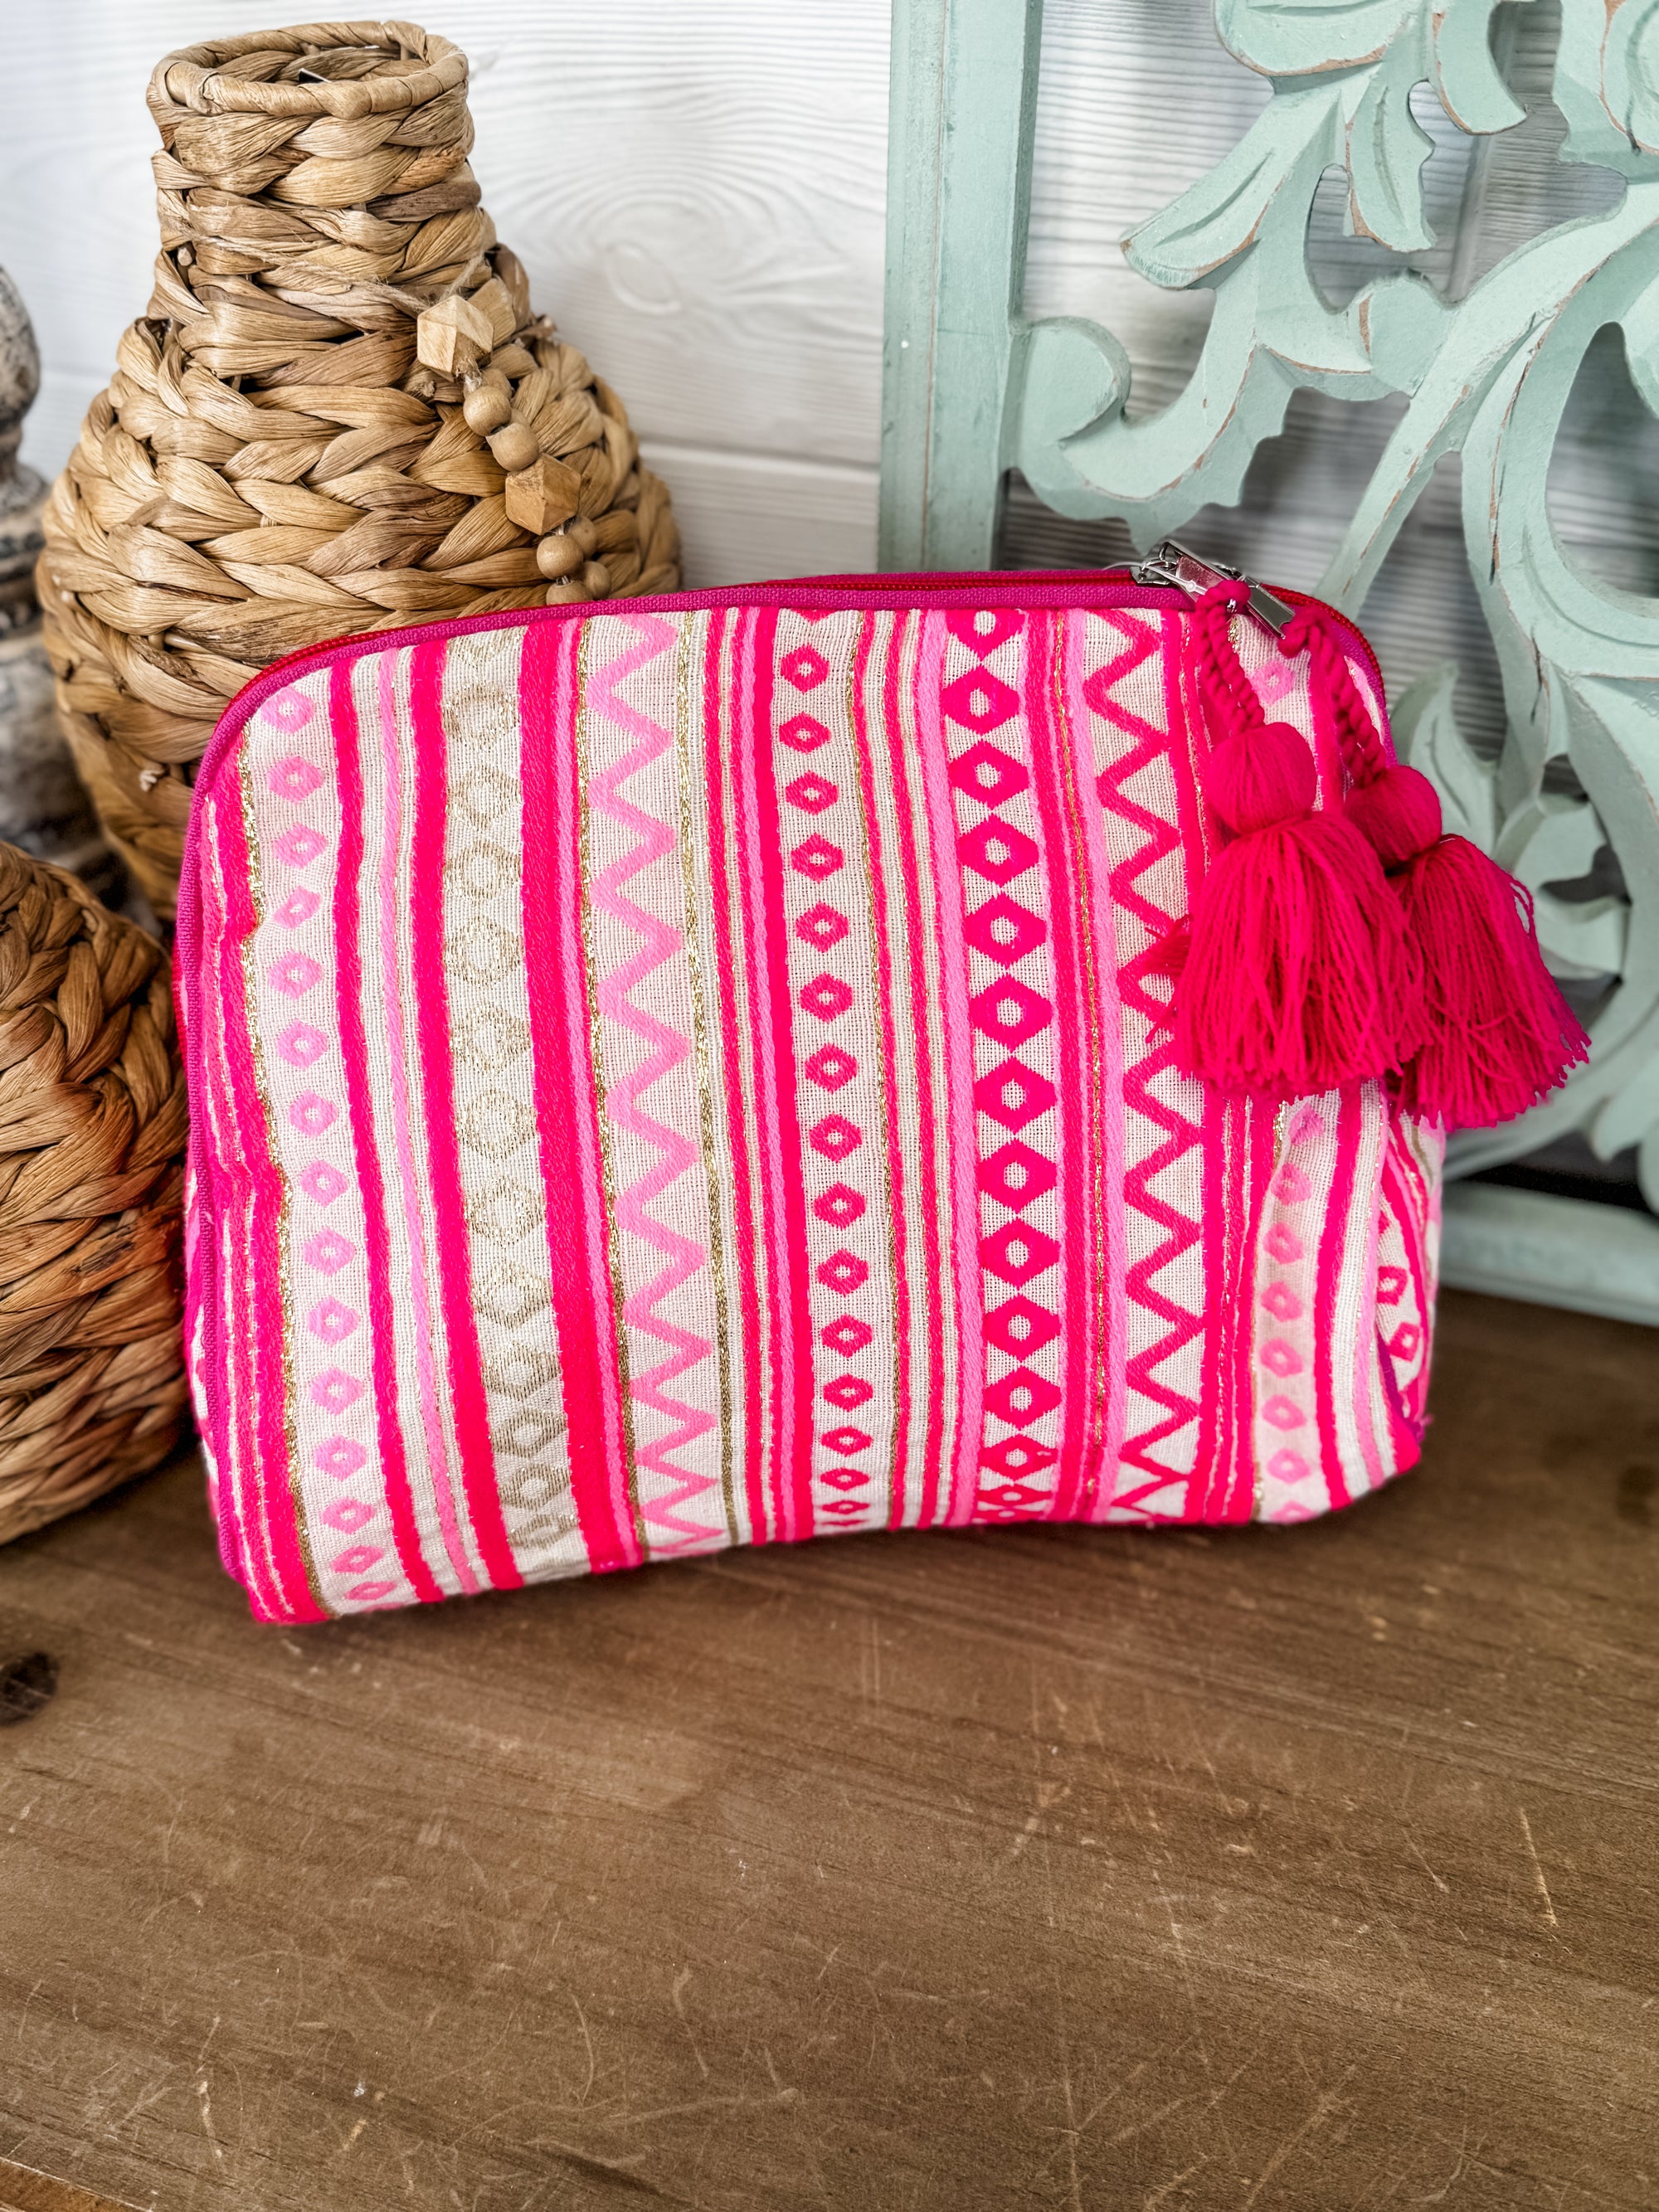 Poppin' Pink! Large Zipper Pouch